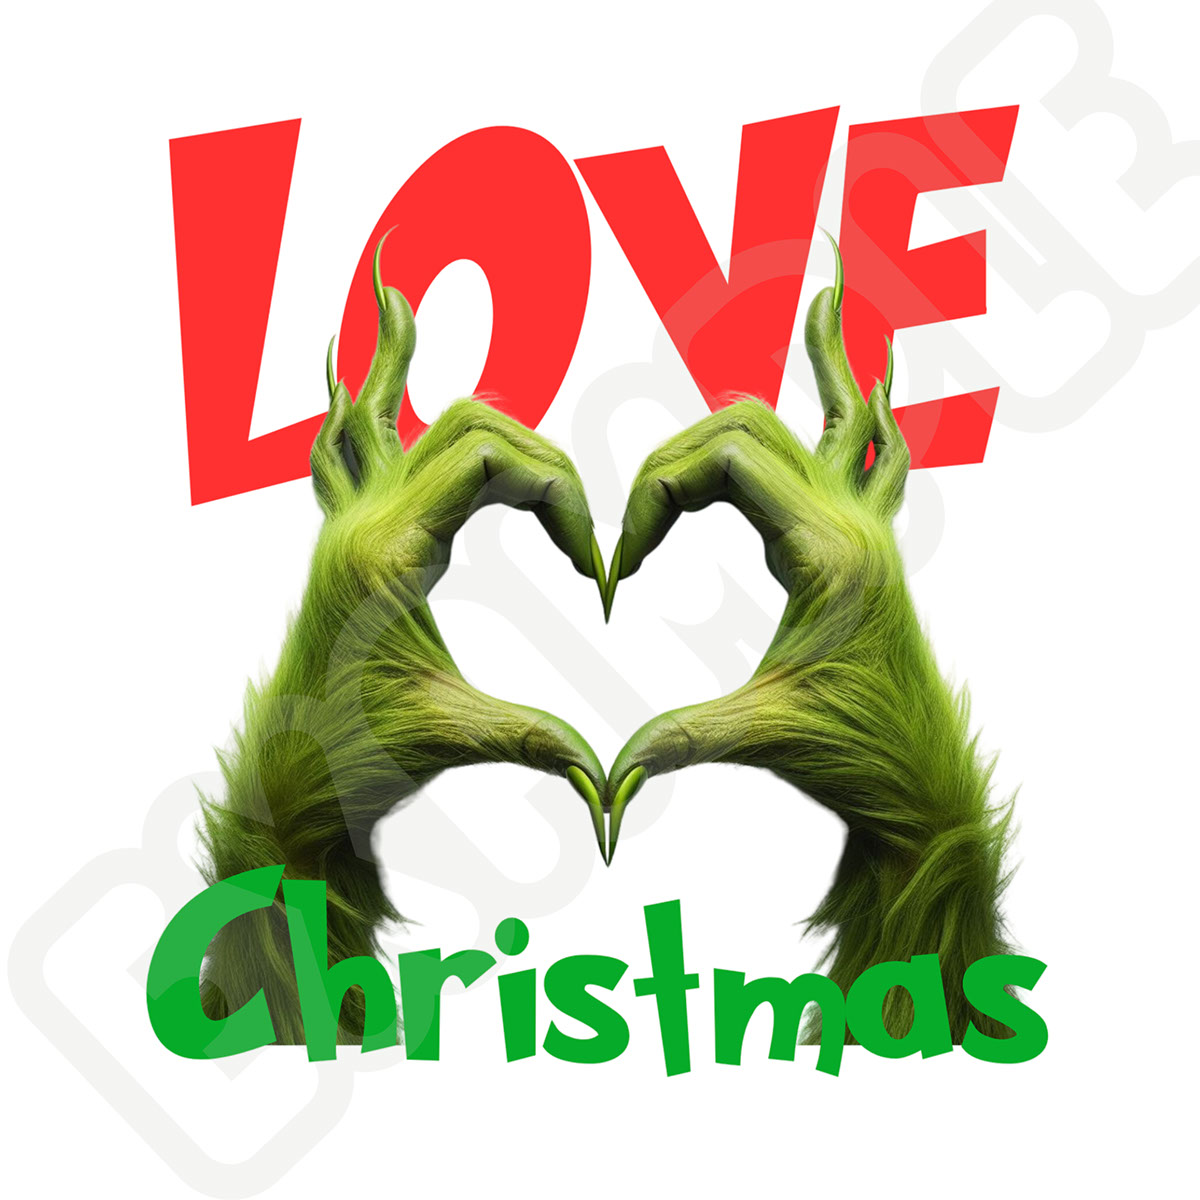 Love Christmas - Grinch hands forming a Heart rendition image